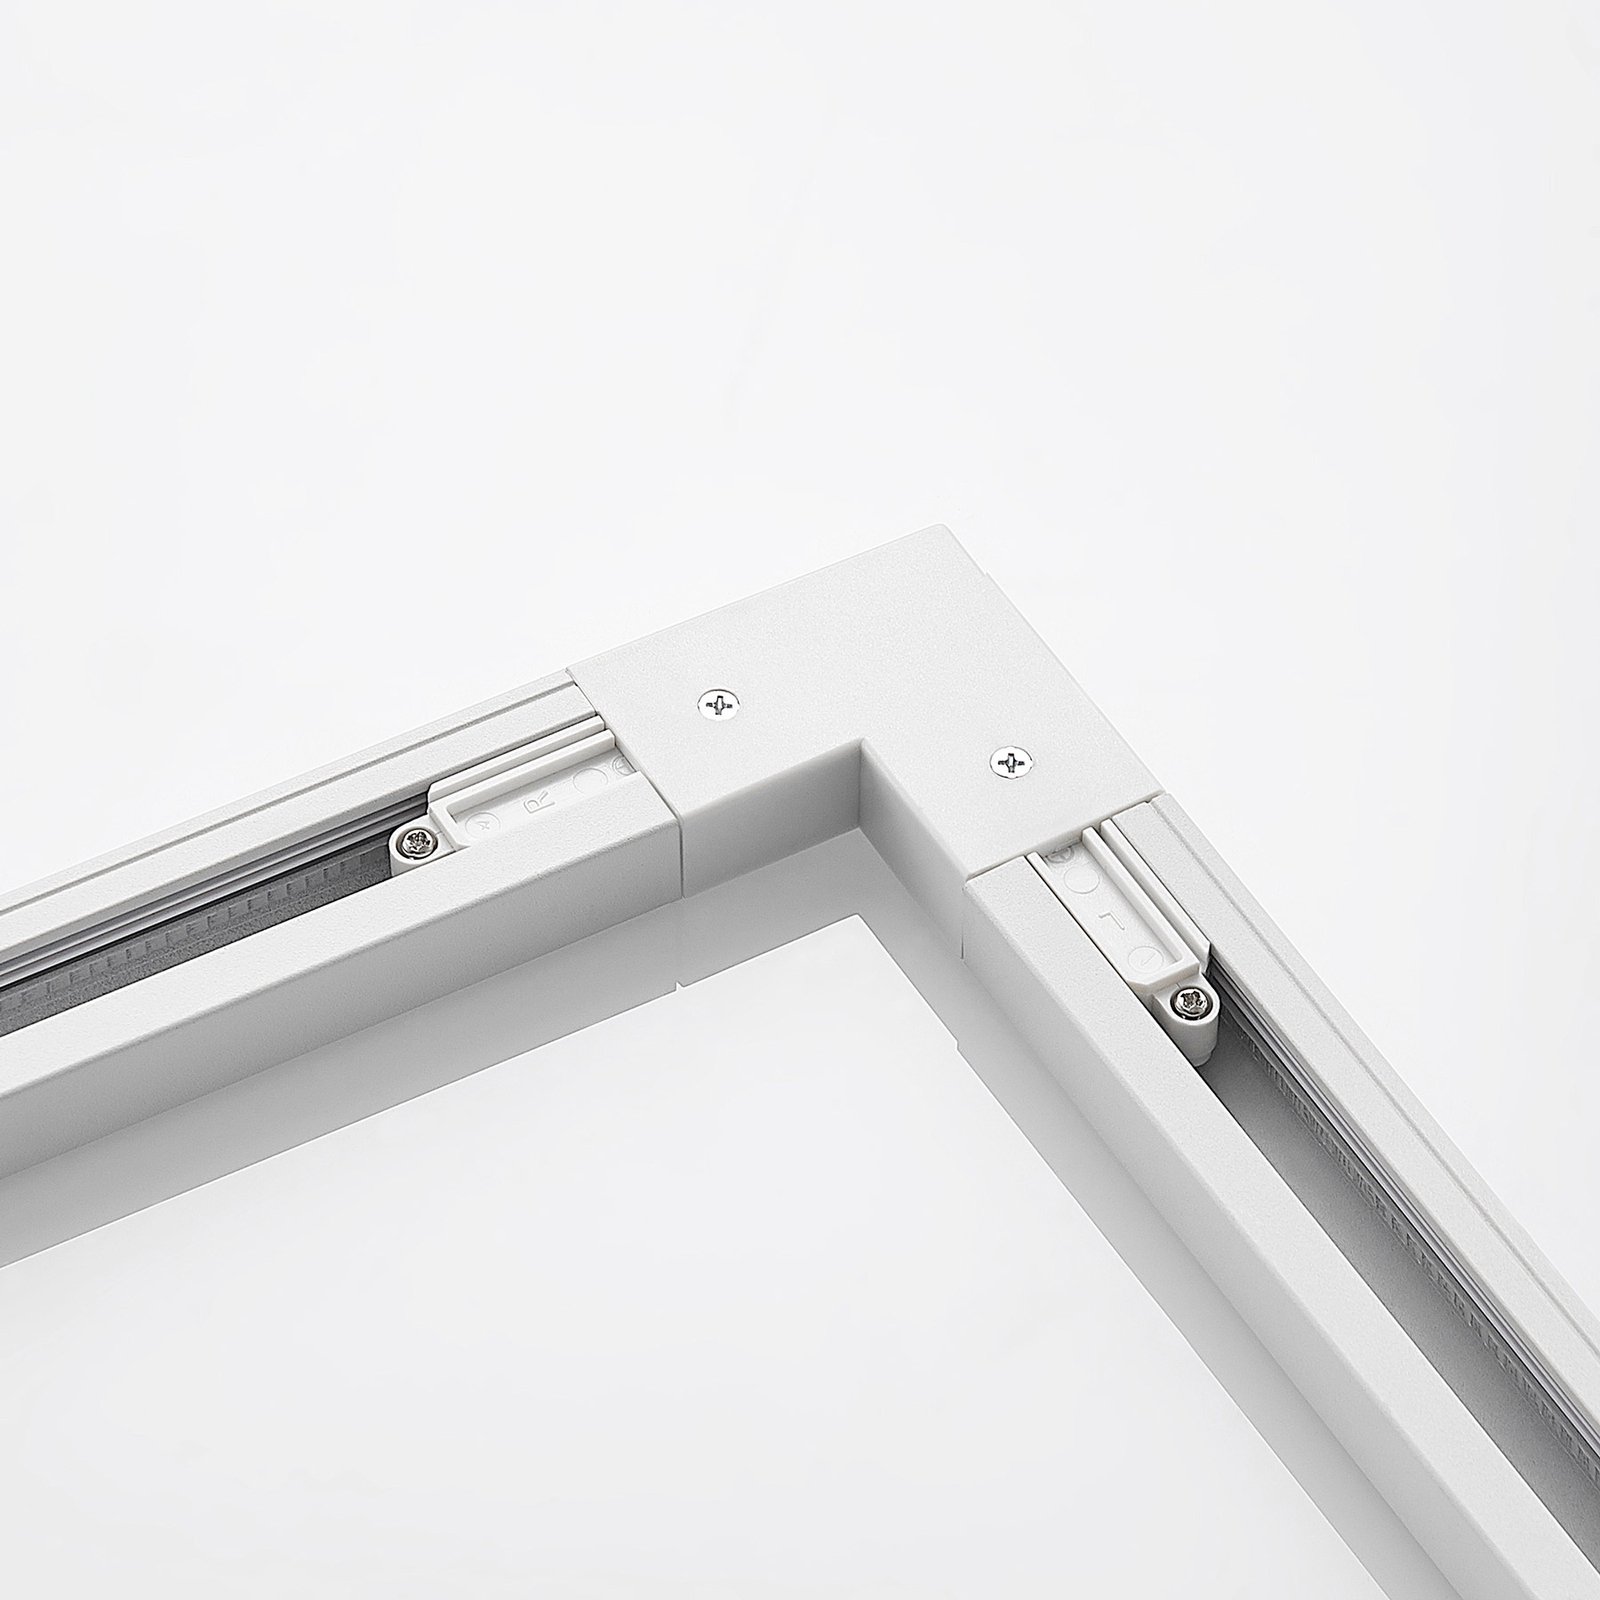 Lindby corner connector Linaro, white, single-circuit track lighting system